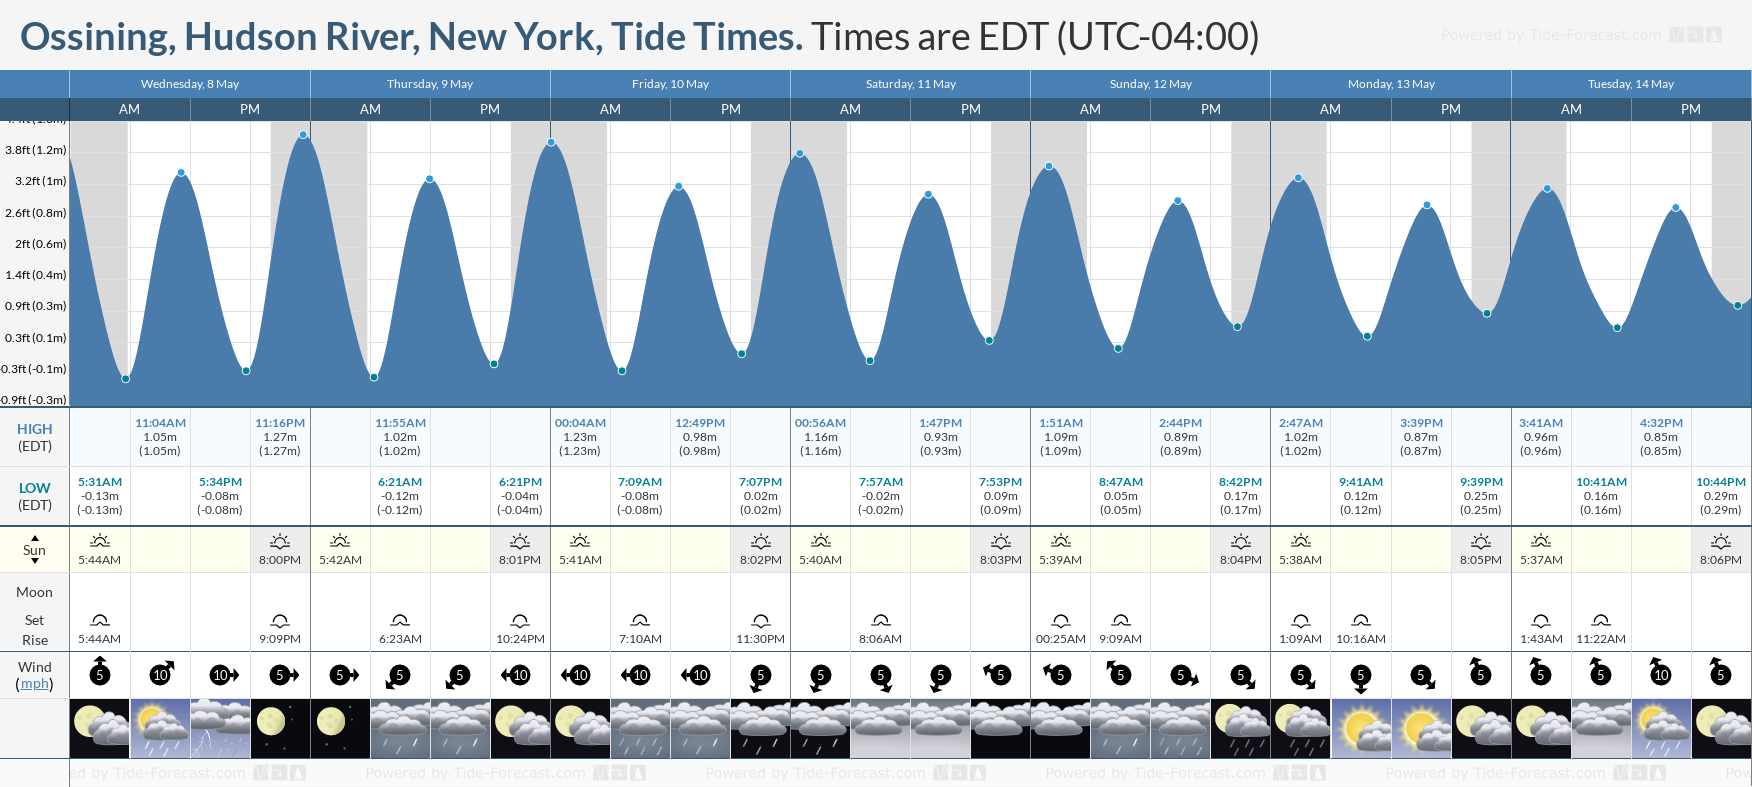 Ossining, Hudson River, New York Tide Chart including high and low tide tide times for the next 7 days